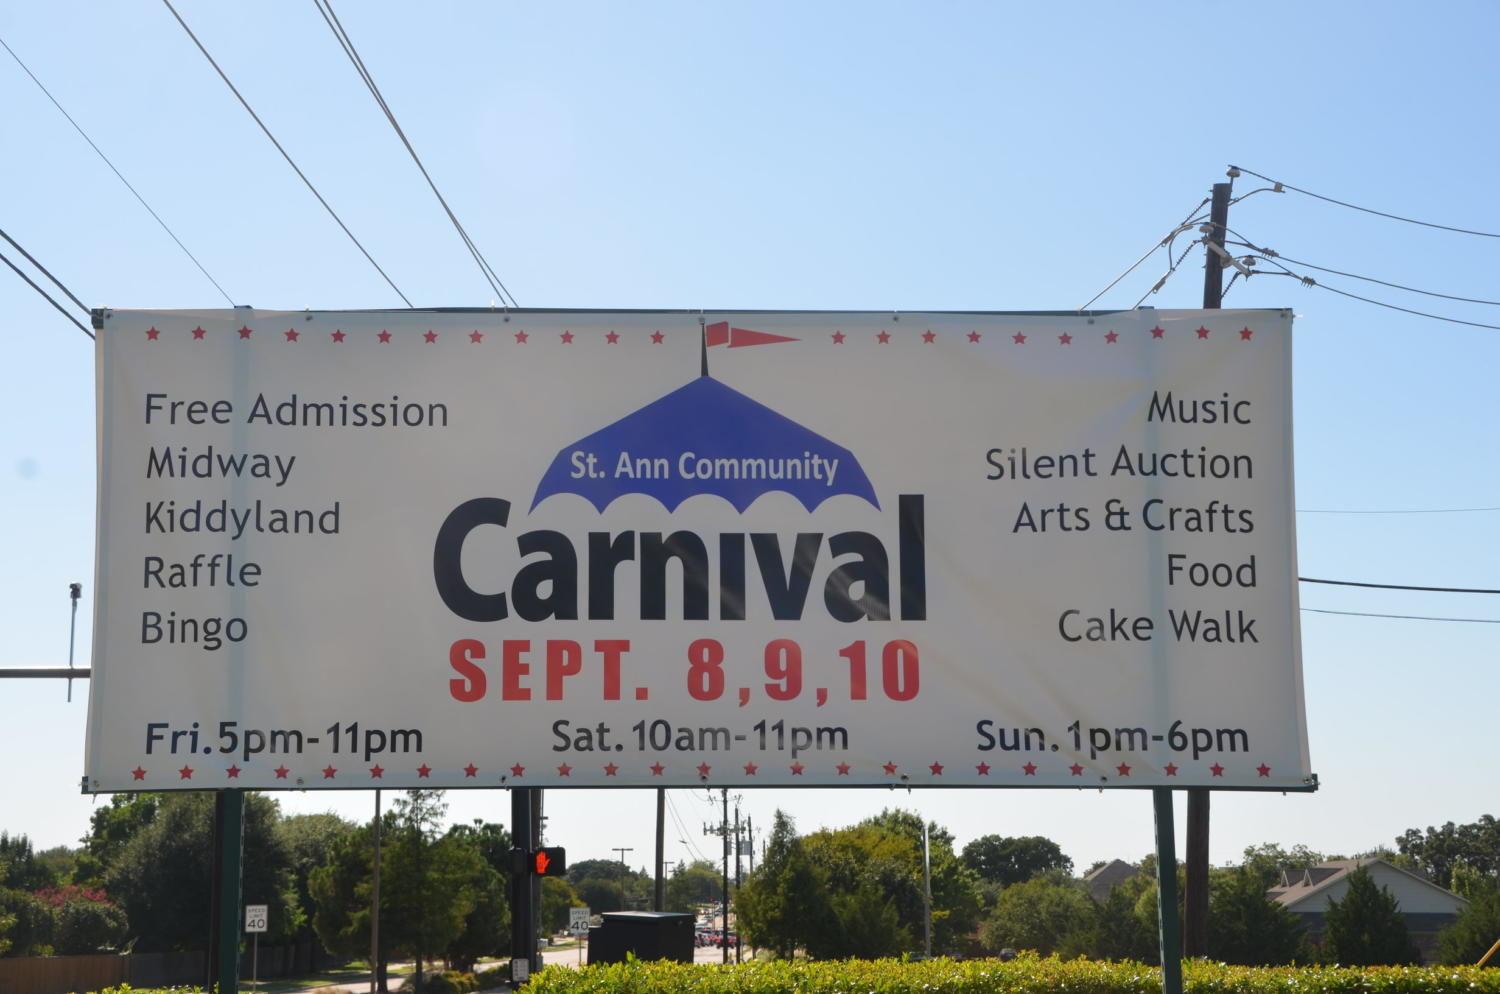 The St. Ann Community Carnival is taking place outside of the church from Friday through Sunday. From games and crafts to rides and music, the event is welcome to people of all ages. 